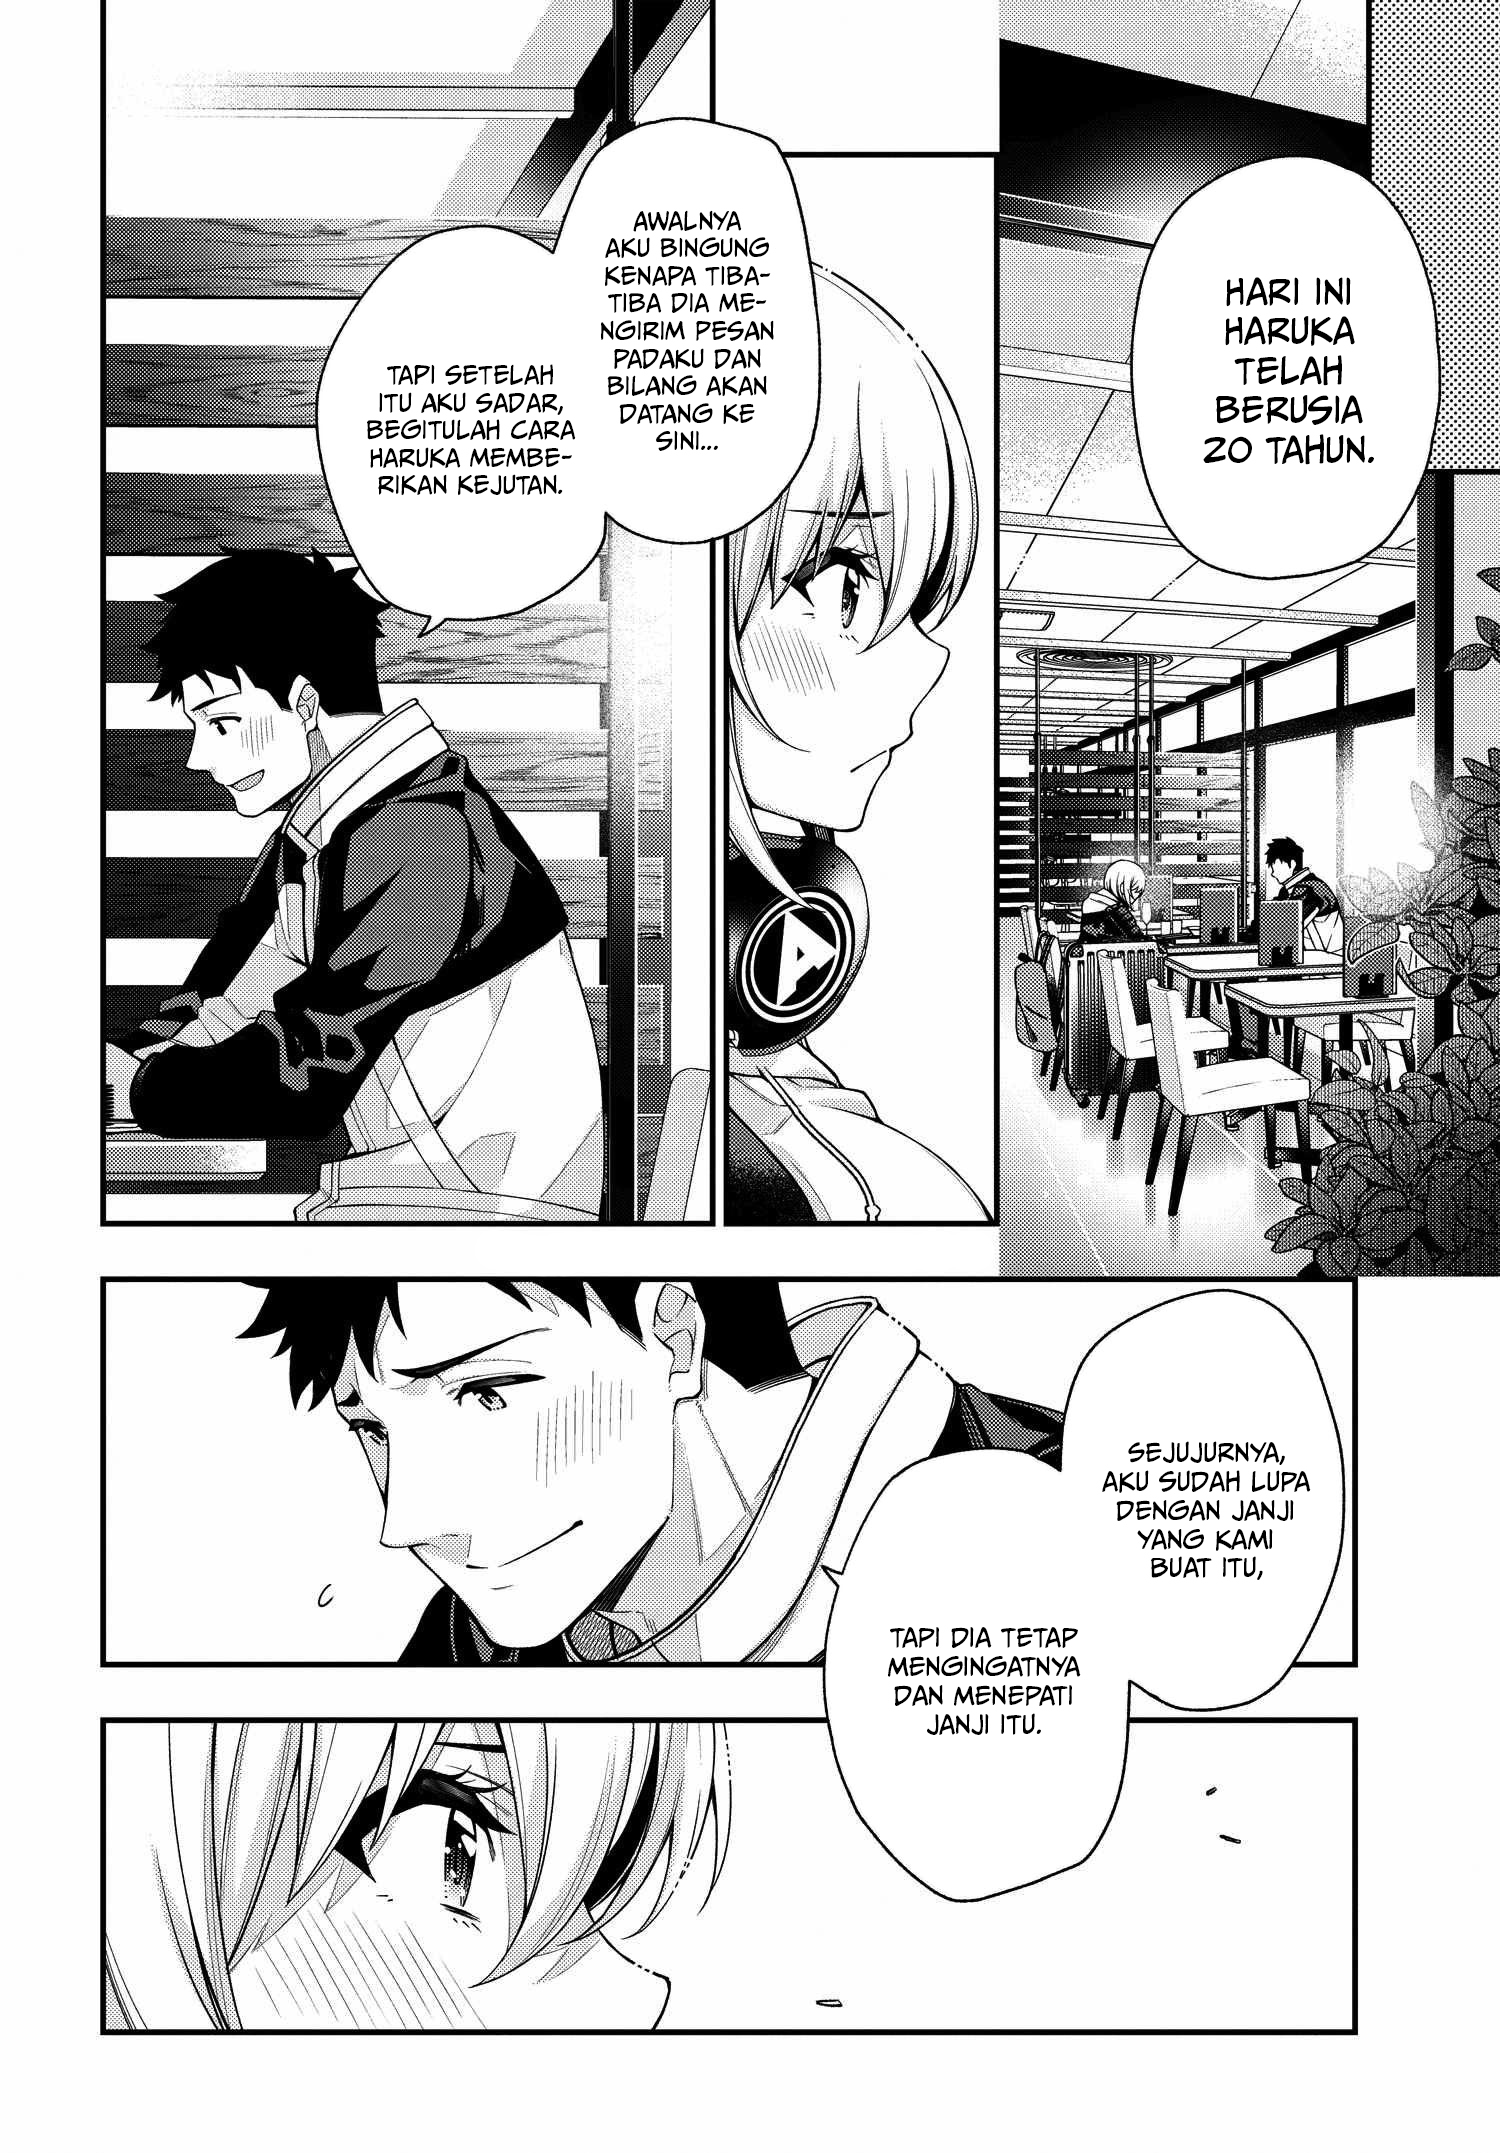 A Choice of Boyfriend and Girlfriend Chapter 01 41